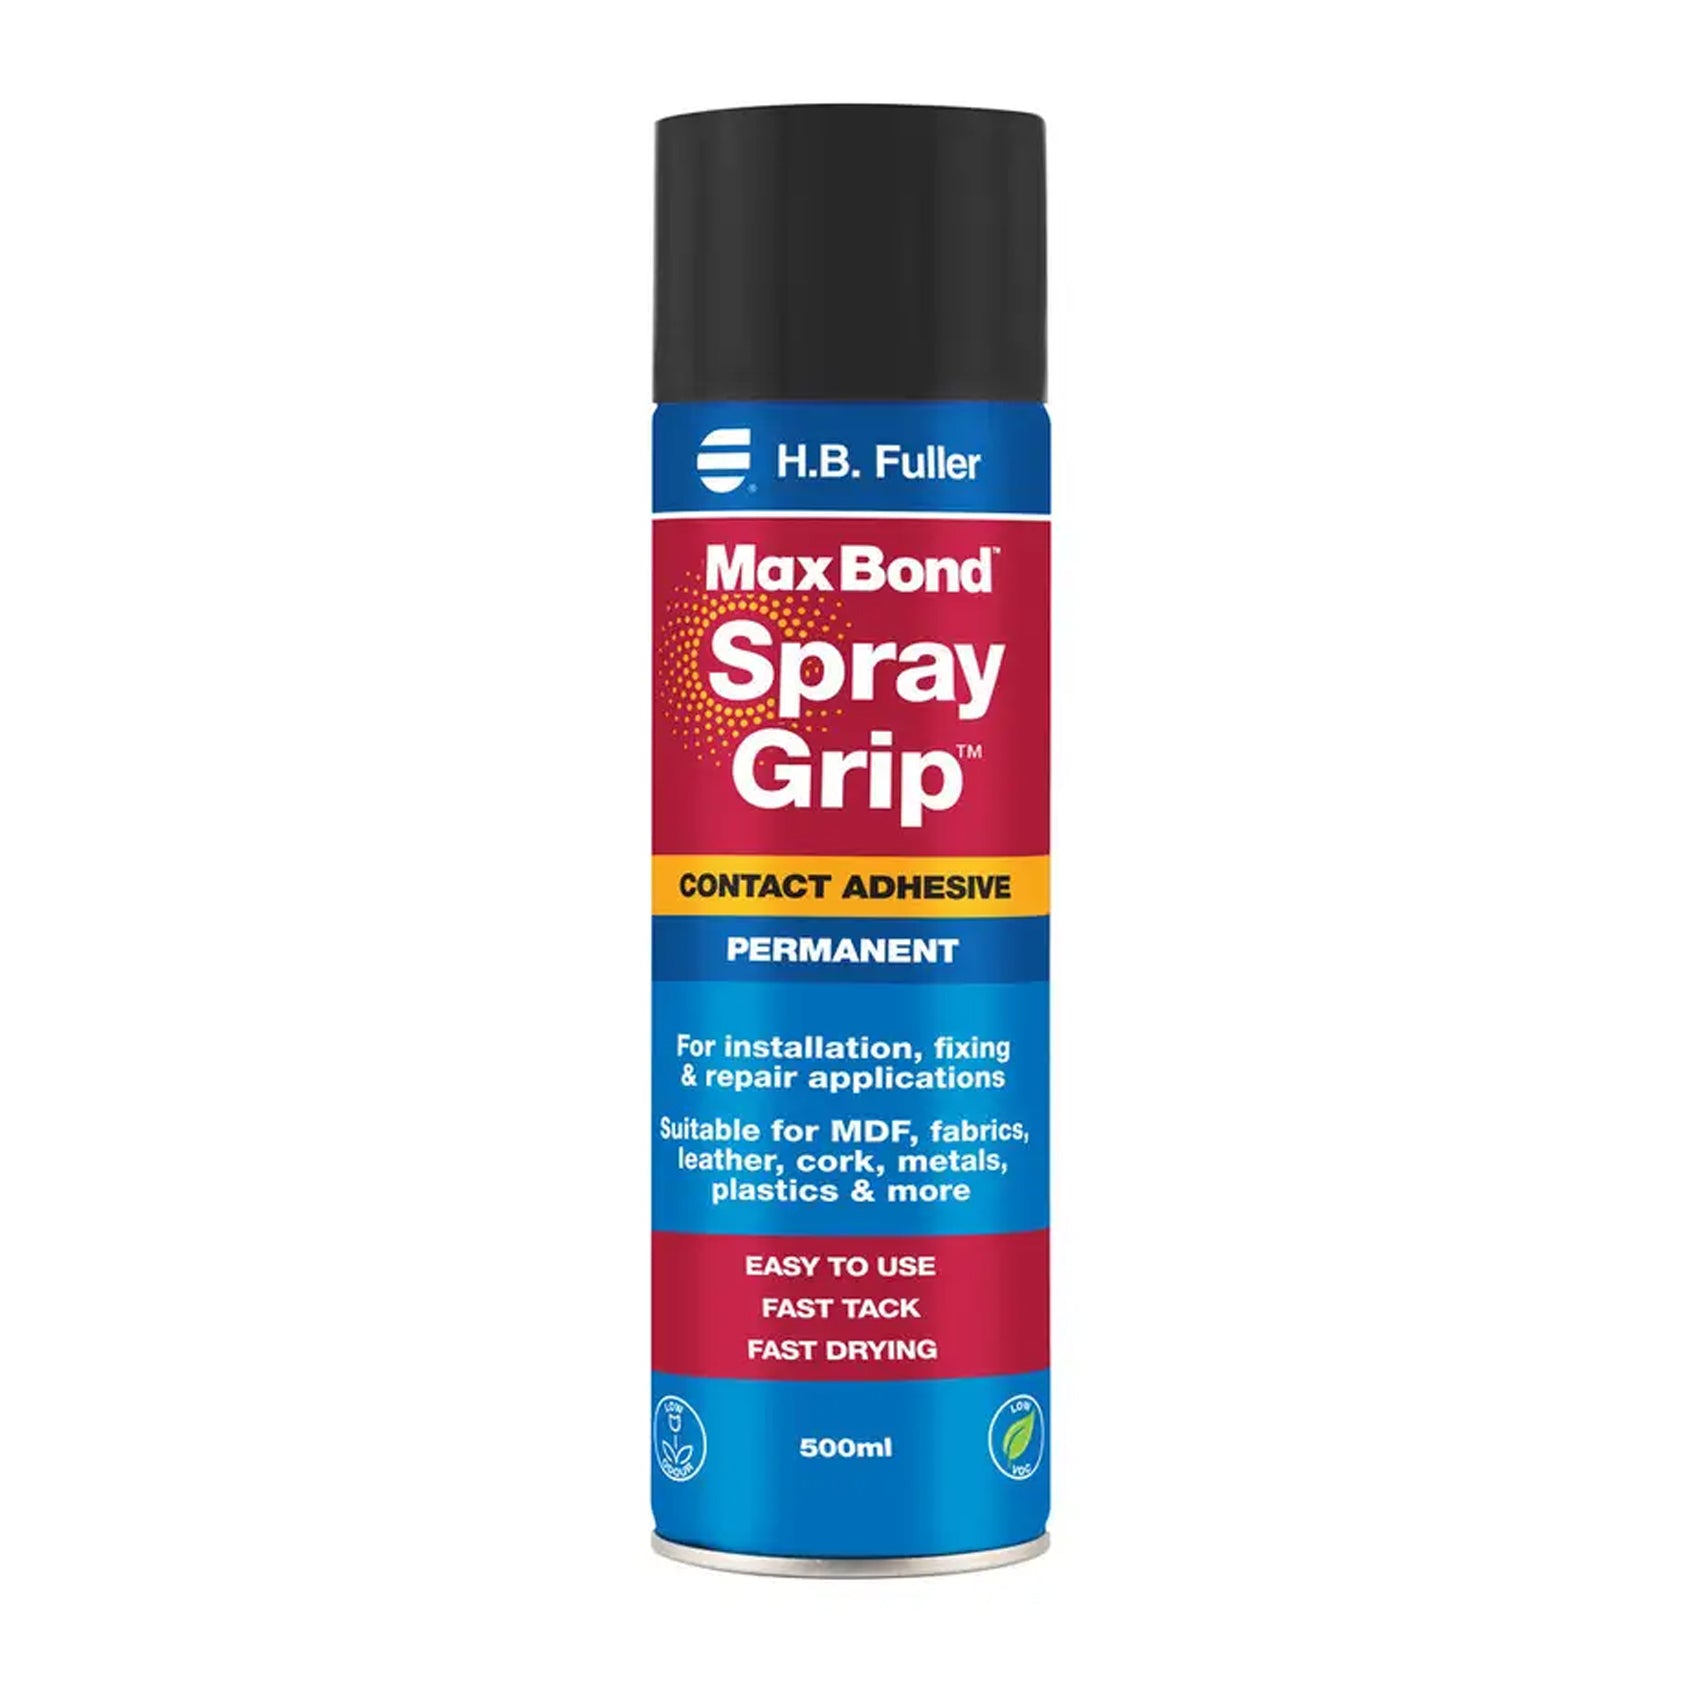 Max Bond Spray Grip Permanent Contact Adhesive 15019037 by HB Fuller